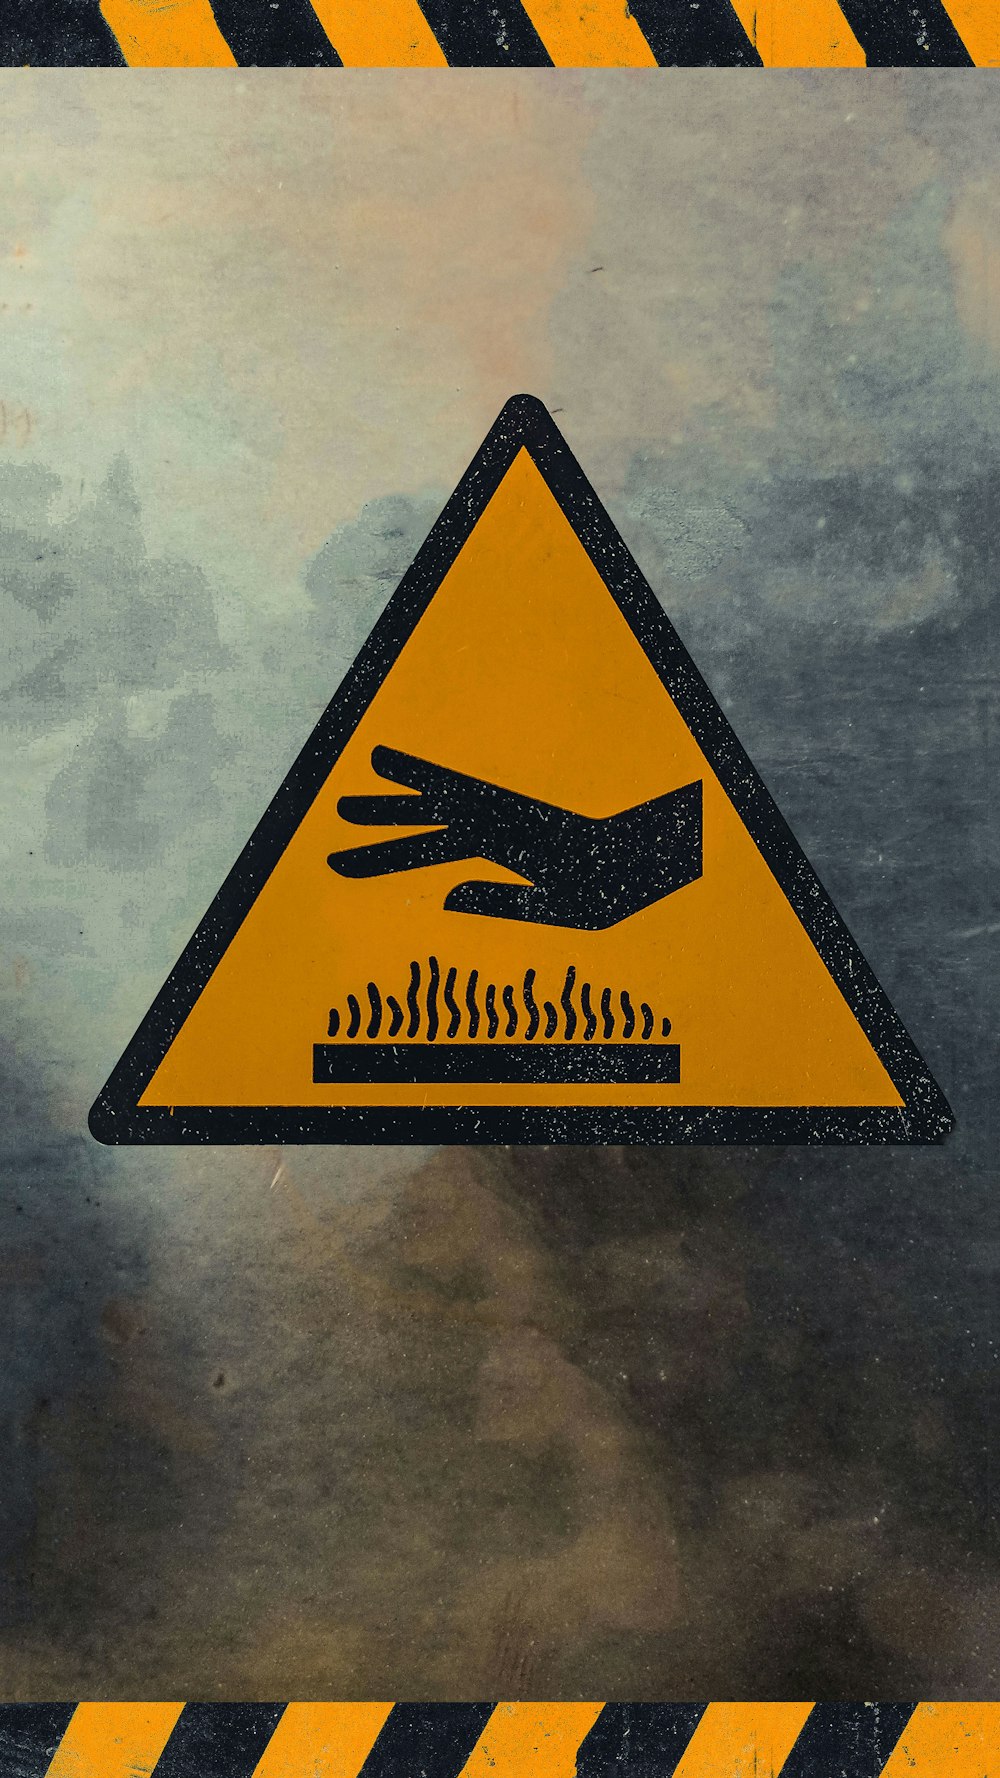 a yellow and black hazard sign with a hand coming out of it